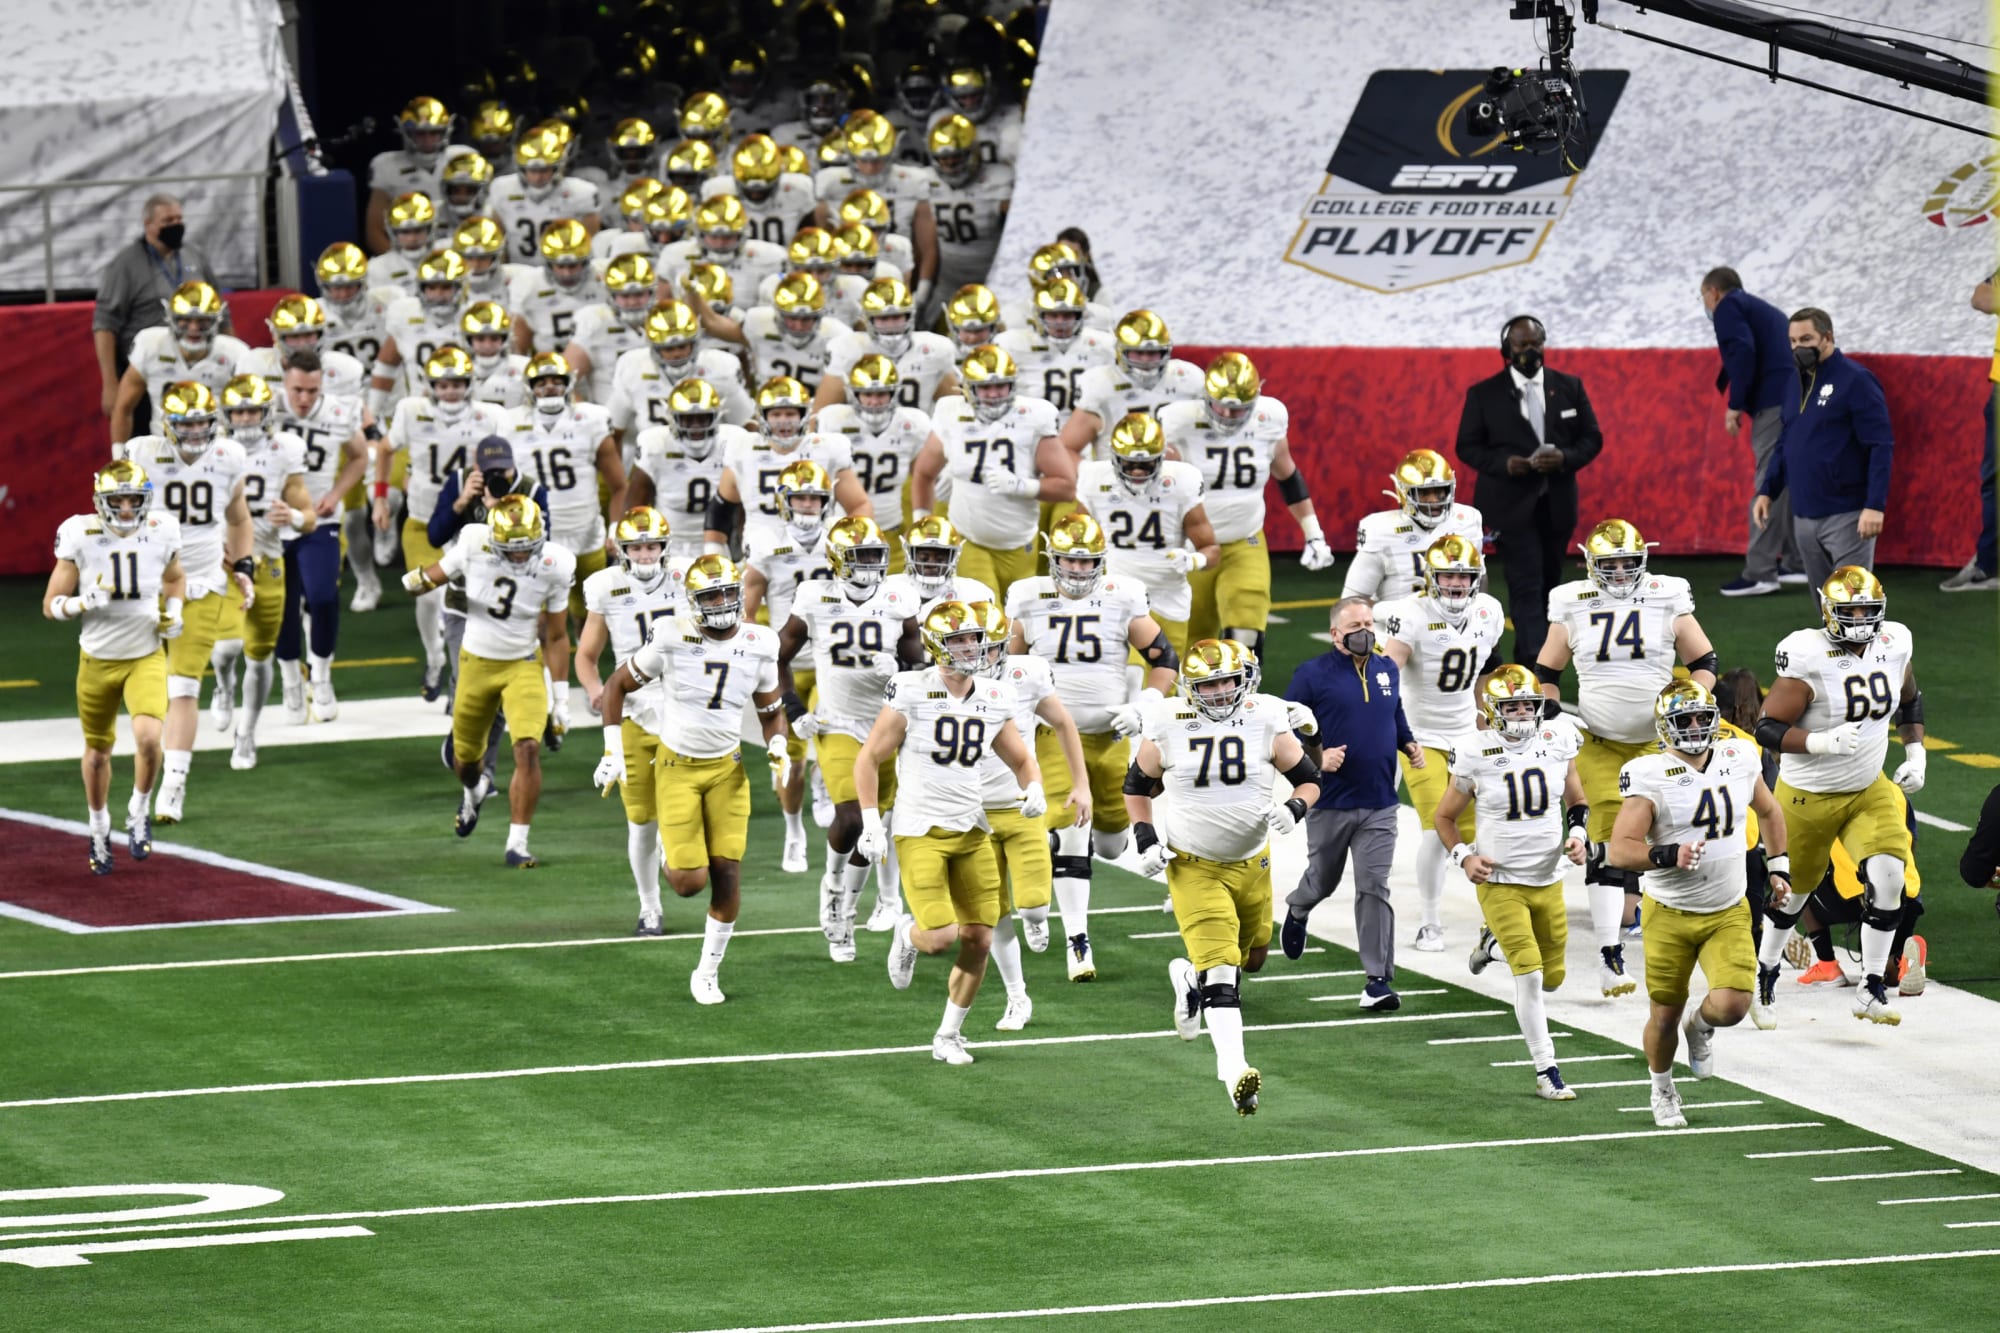 notre dame football wiki Notre dame pays record low interest rate for 400 million bond Dark